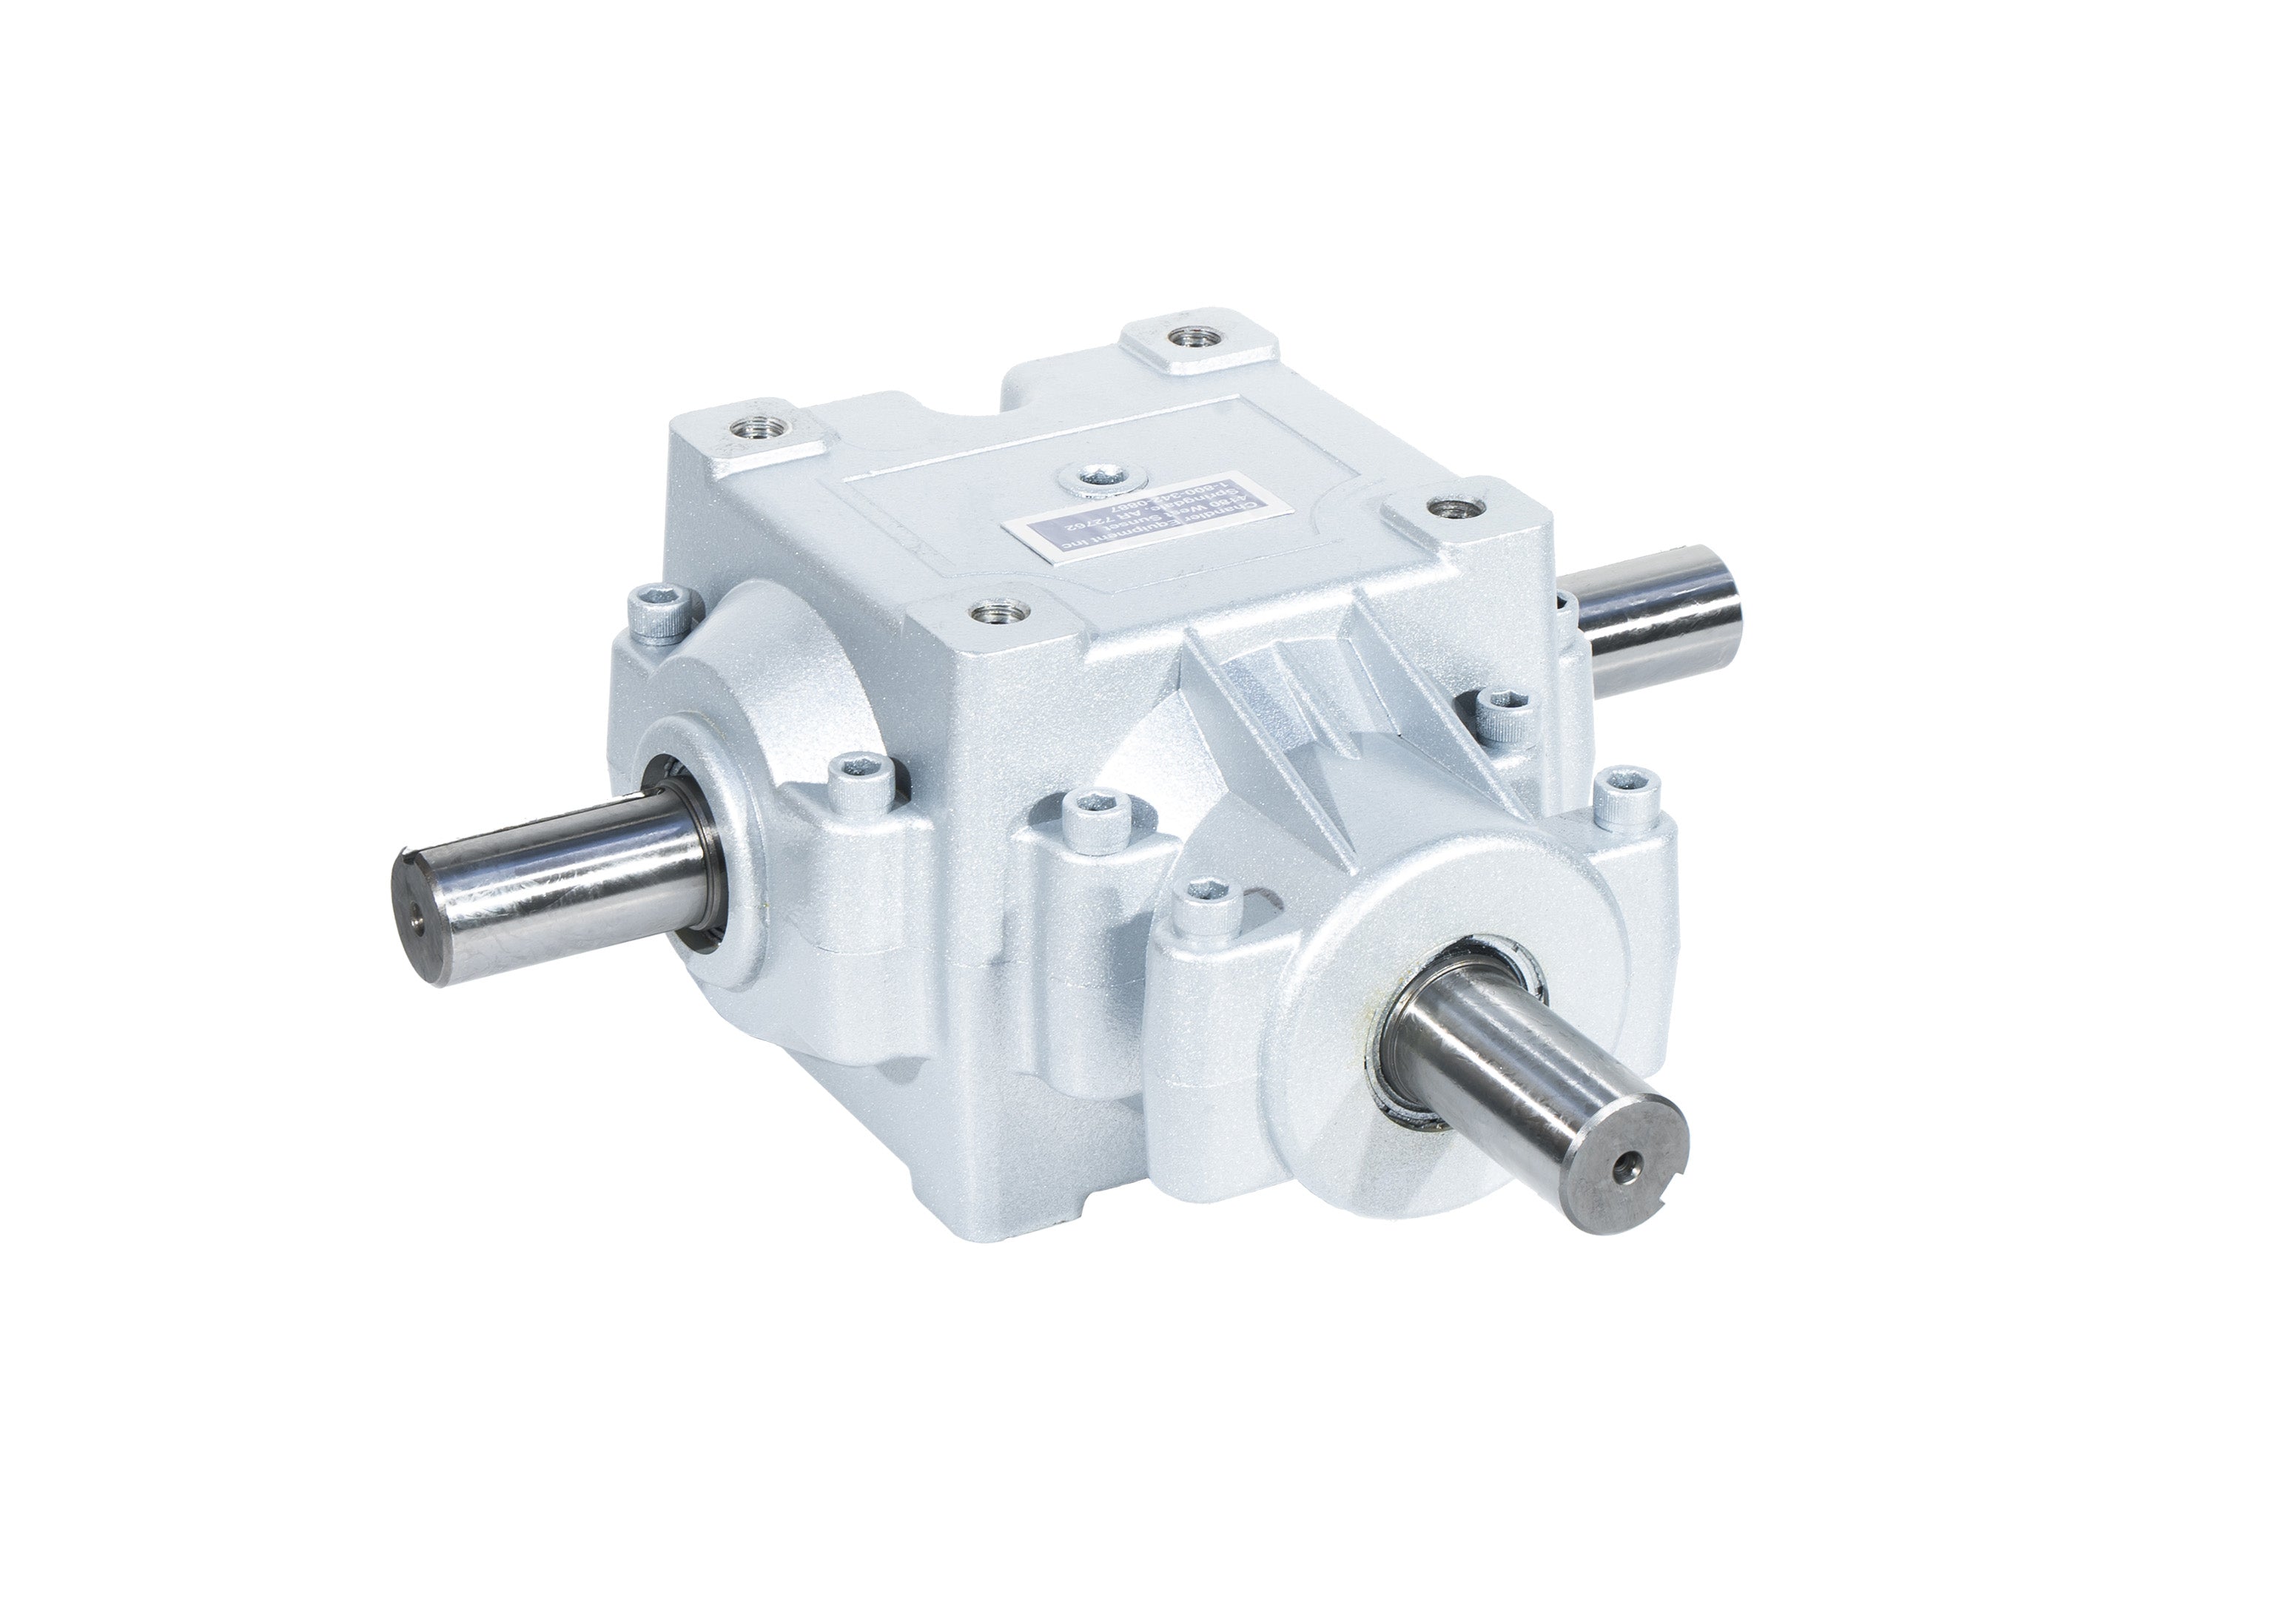 R400 & R500 3-Shaft Superior Style Gearbox 1:1 Ratio with 1.25" Shafts